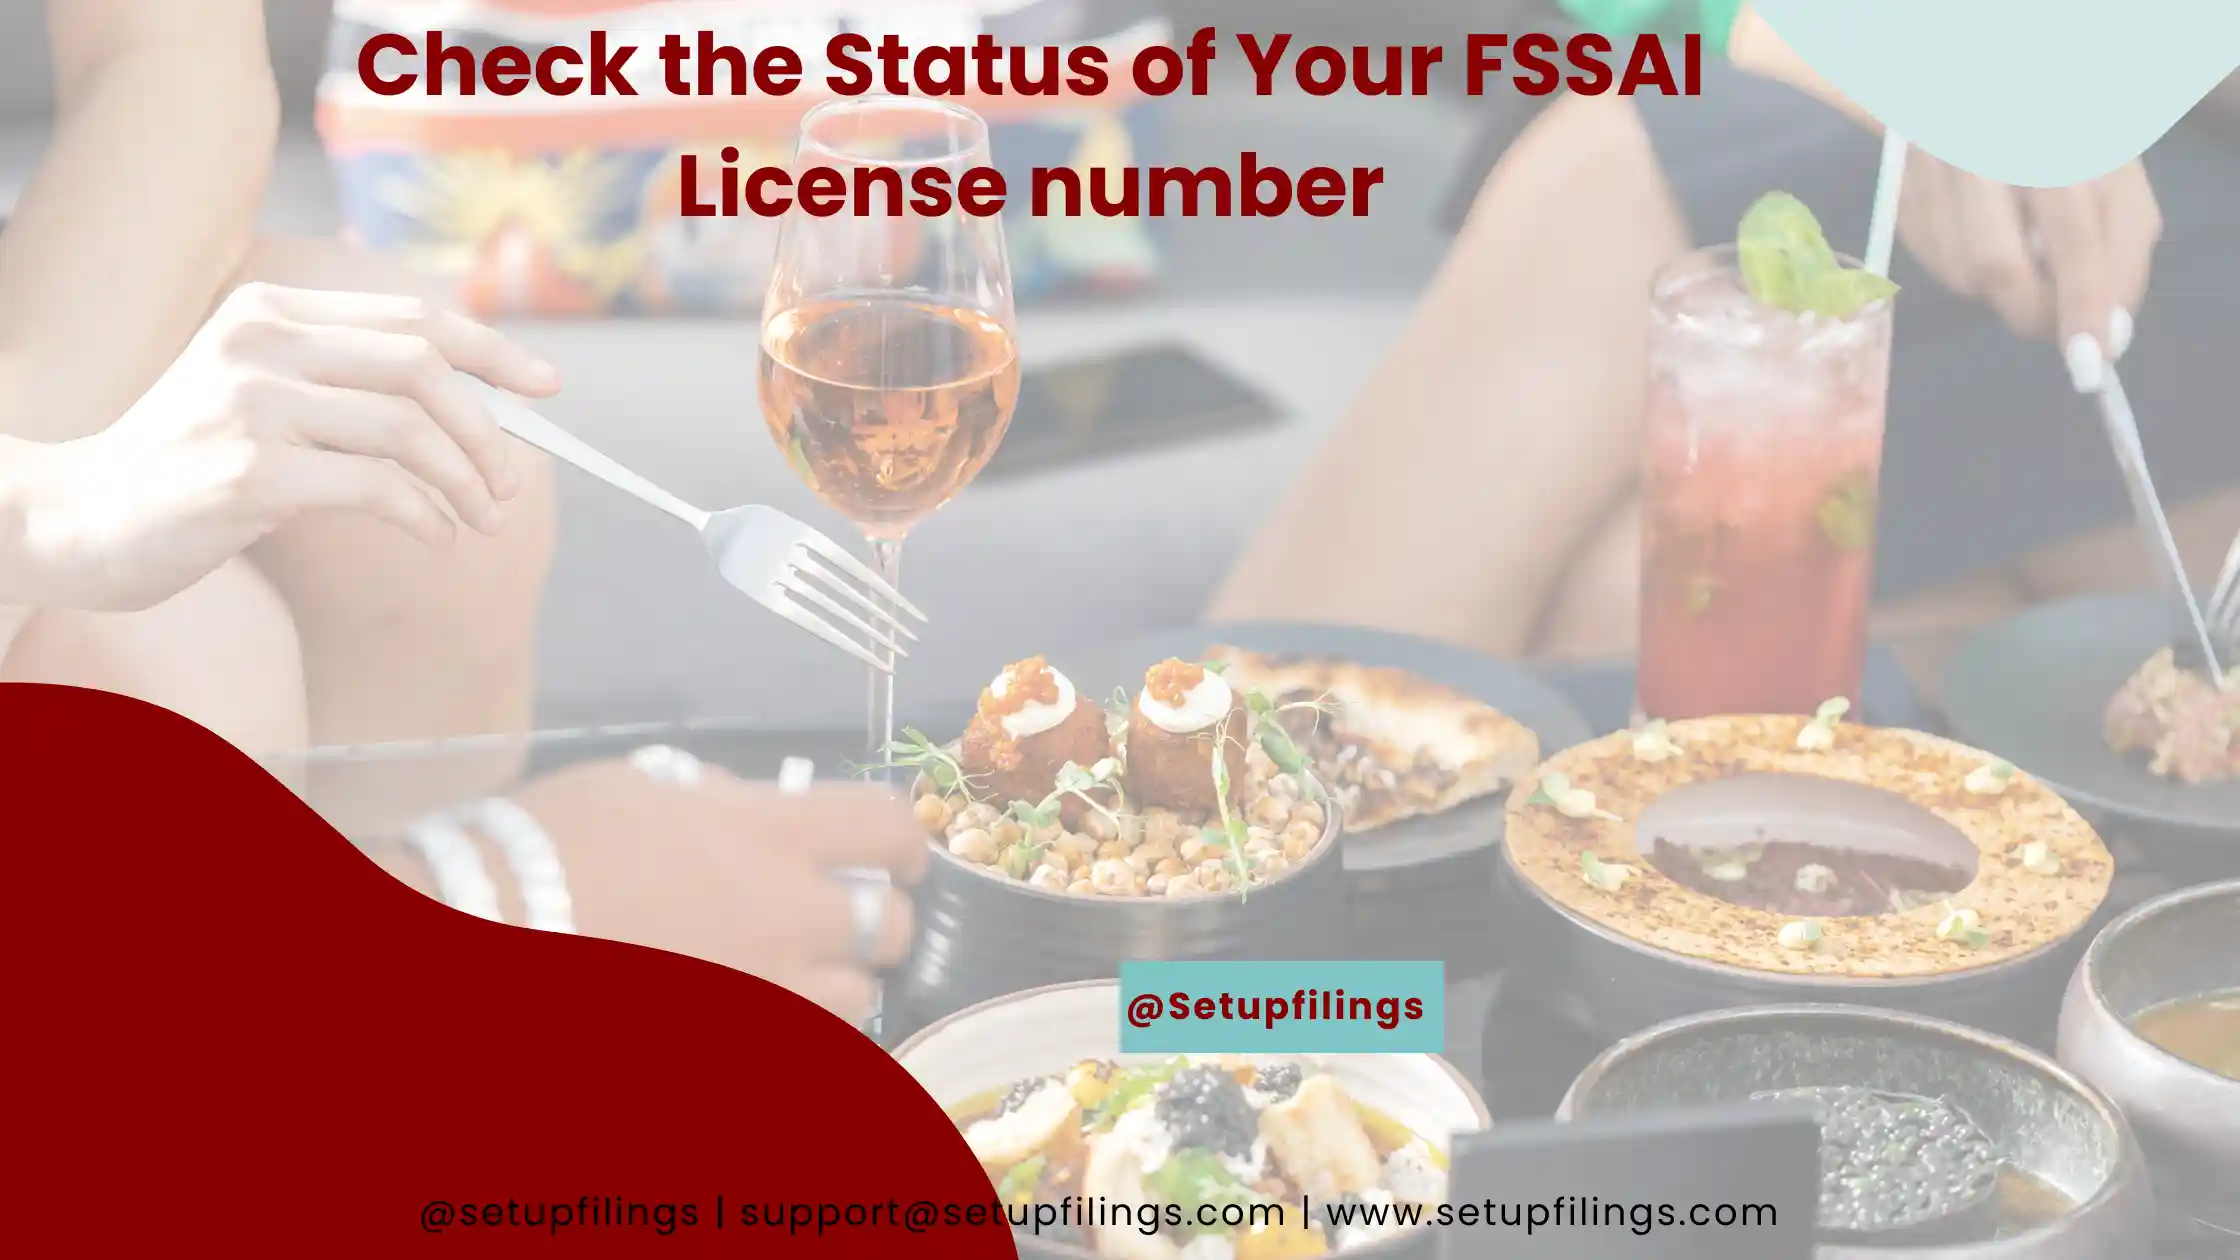 Check the Status of Your FSSAI License number